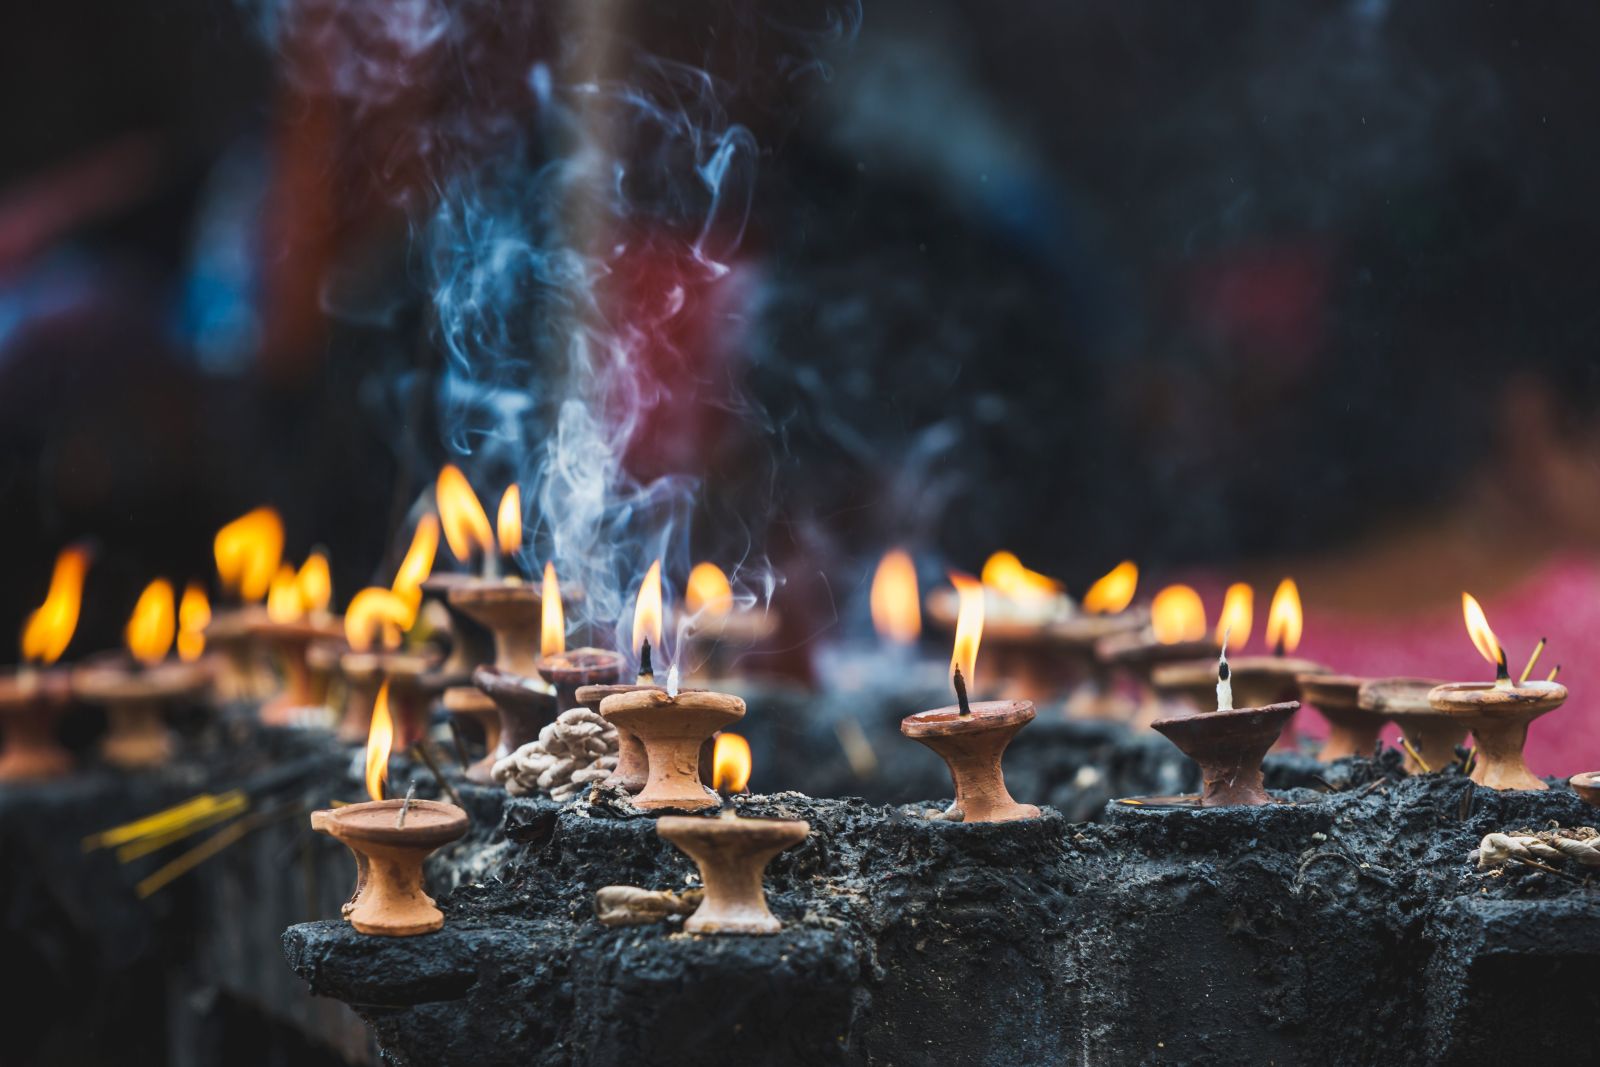 Butter lamps offering at a temple in Bhutan